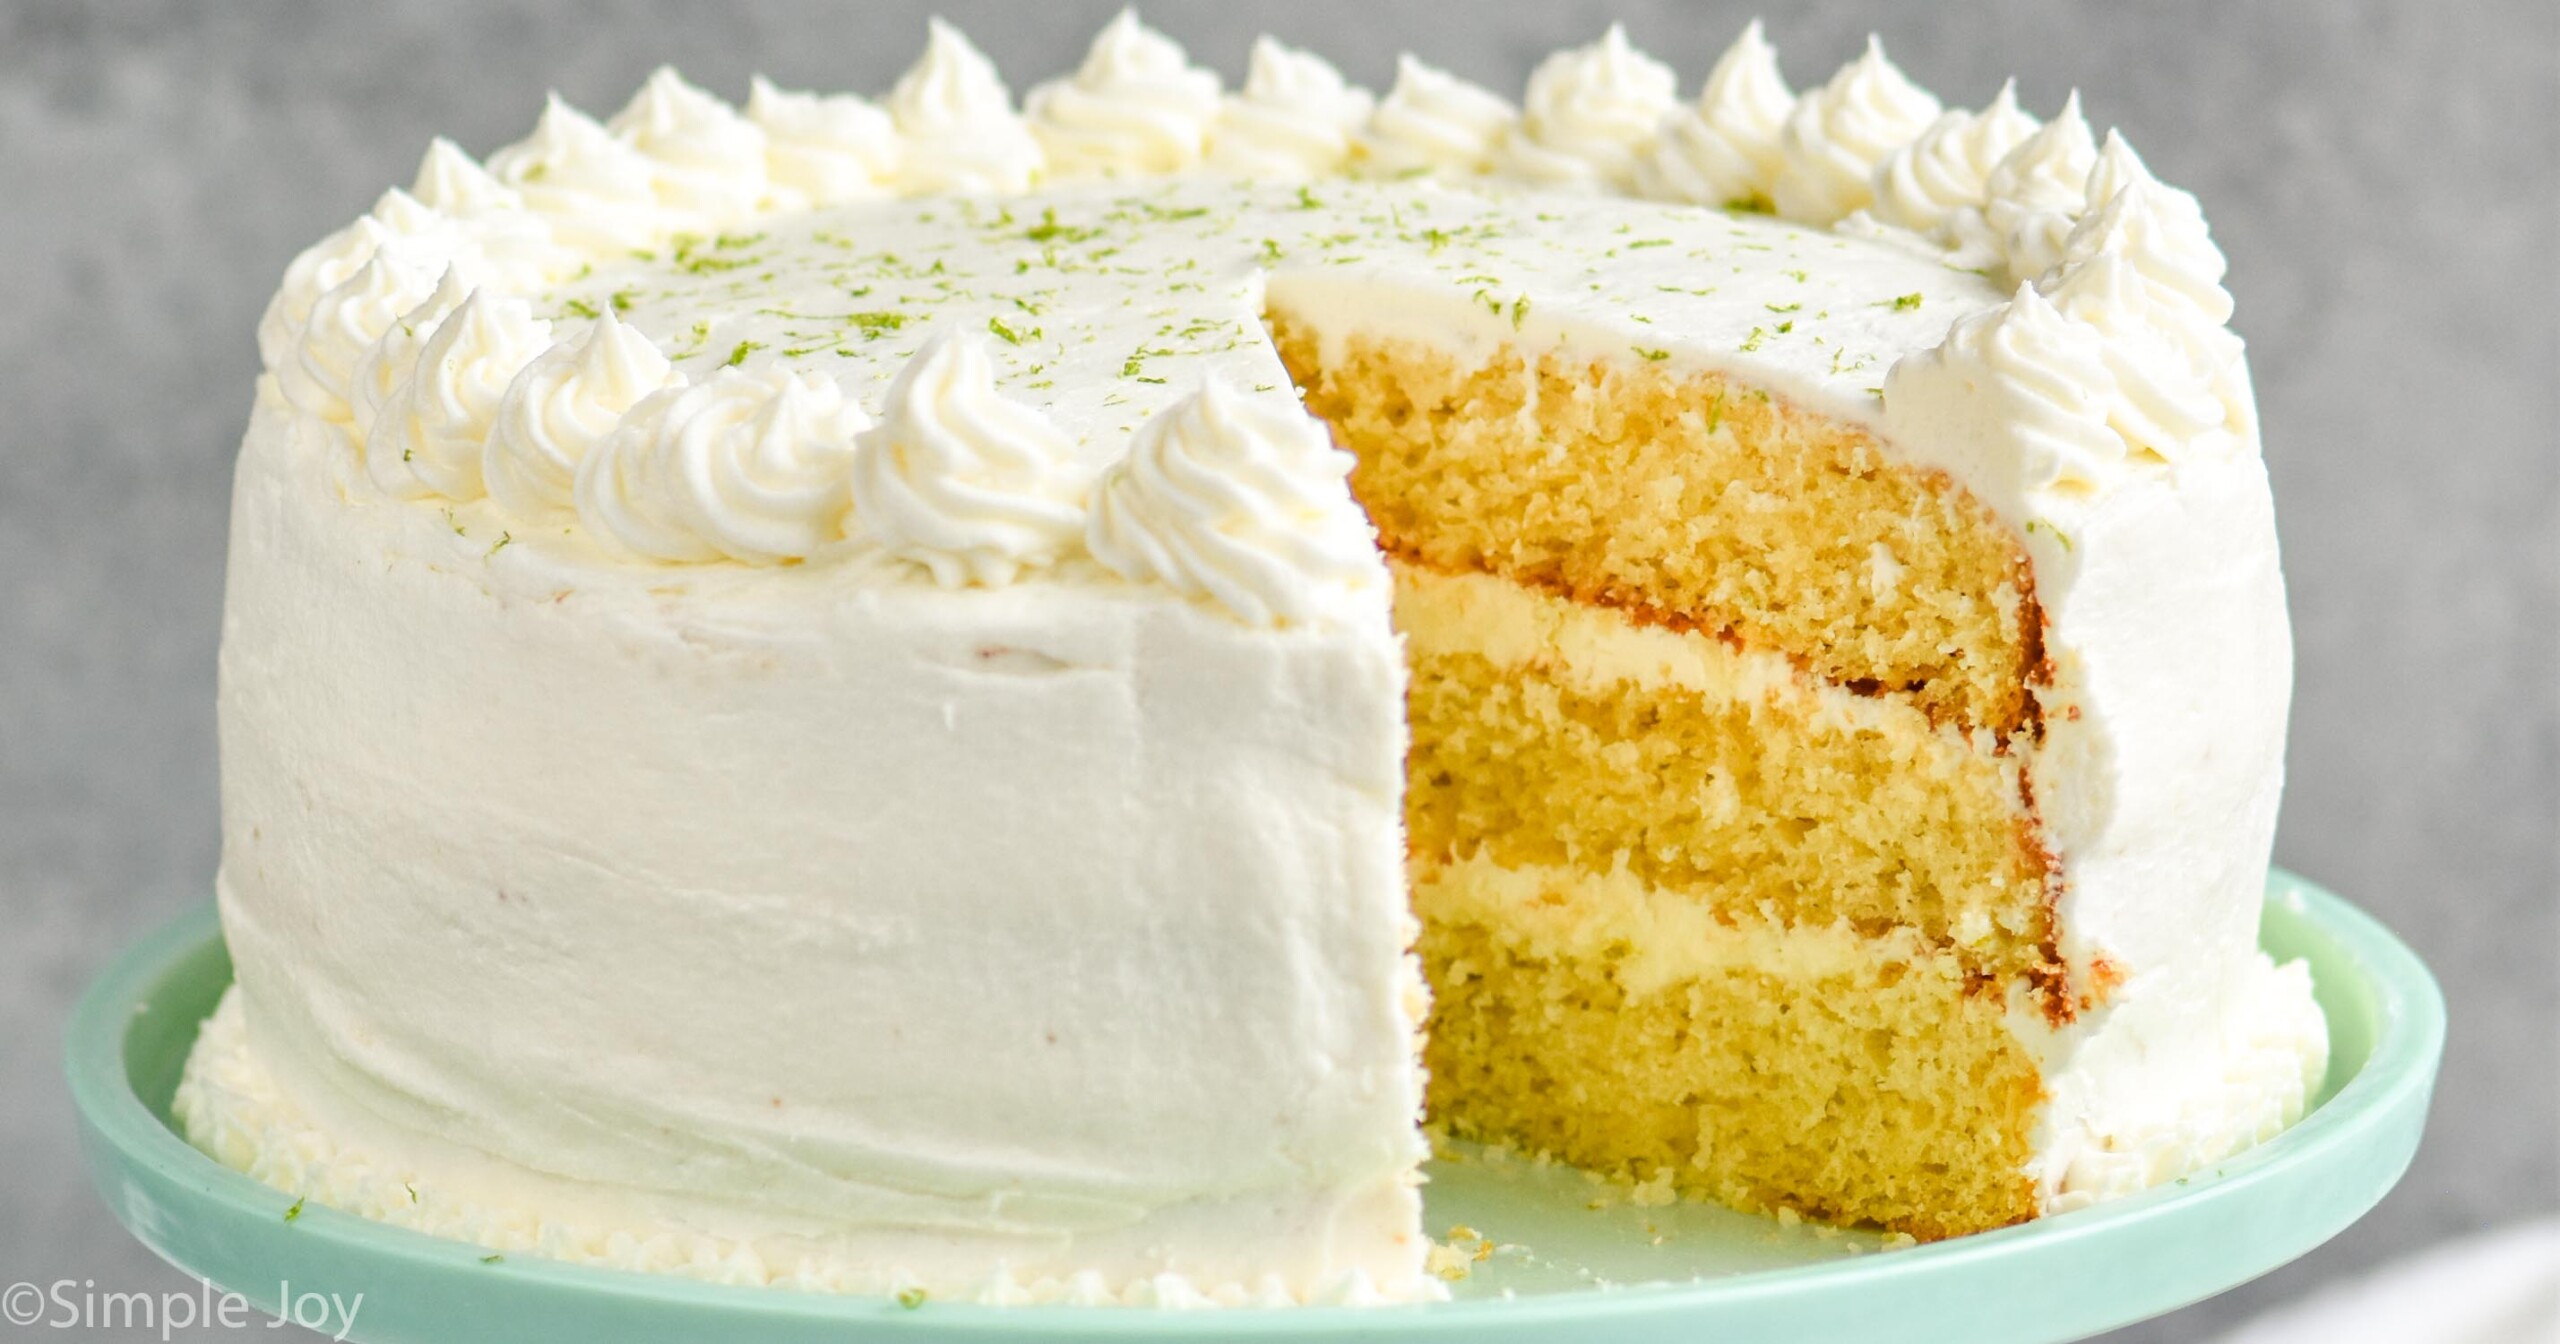 Dark and stormy cake with rum and lime buttercream recipe